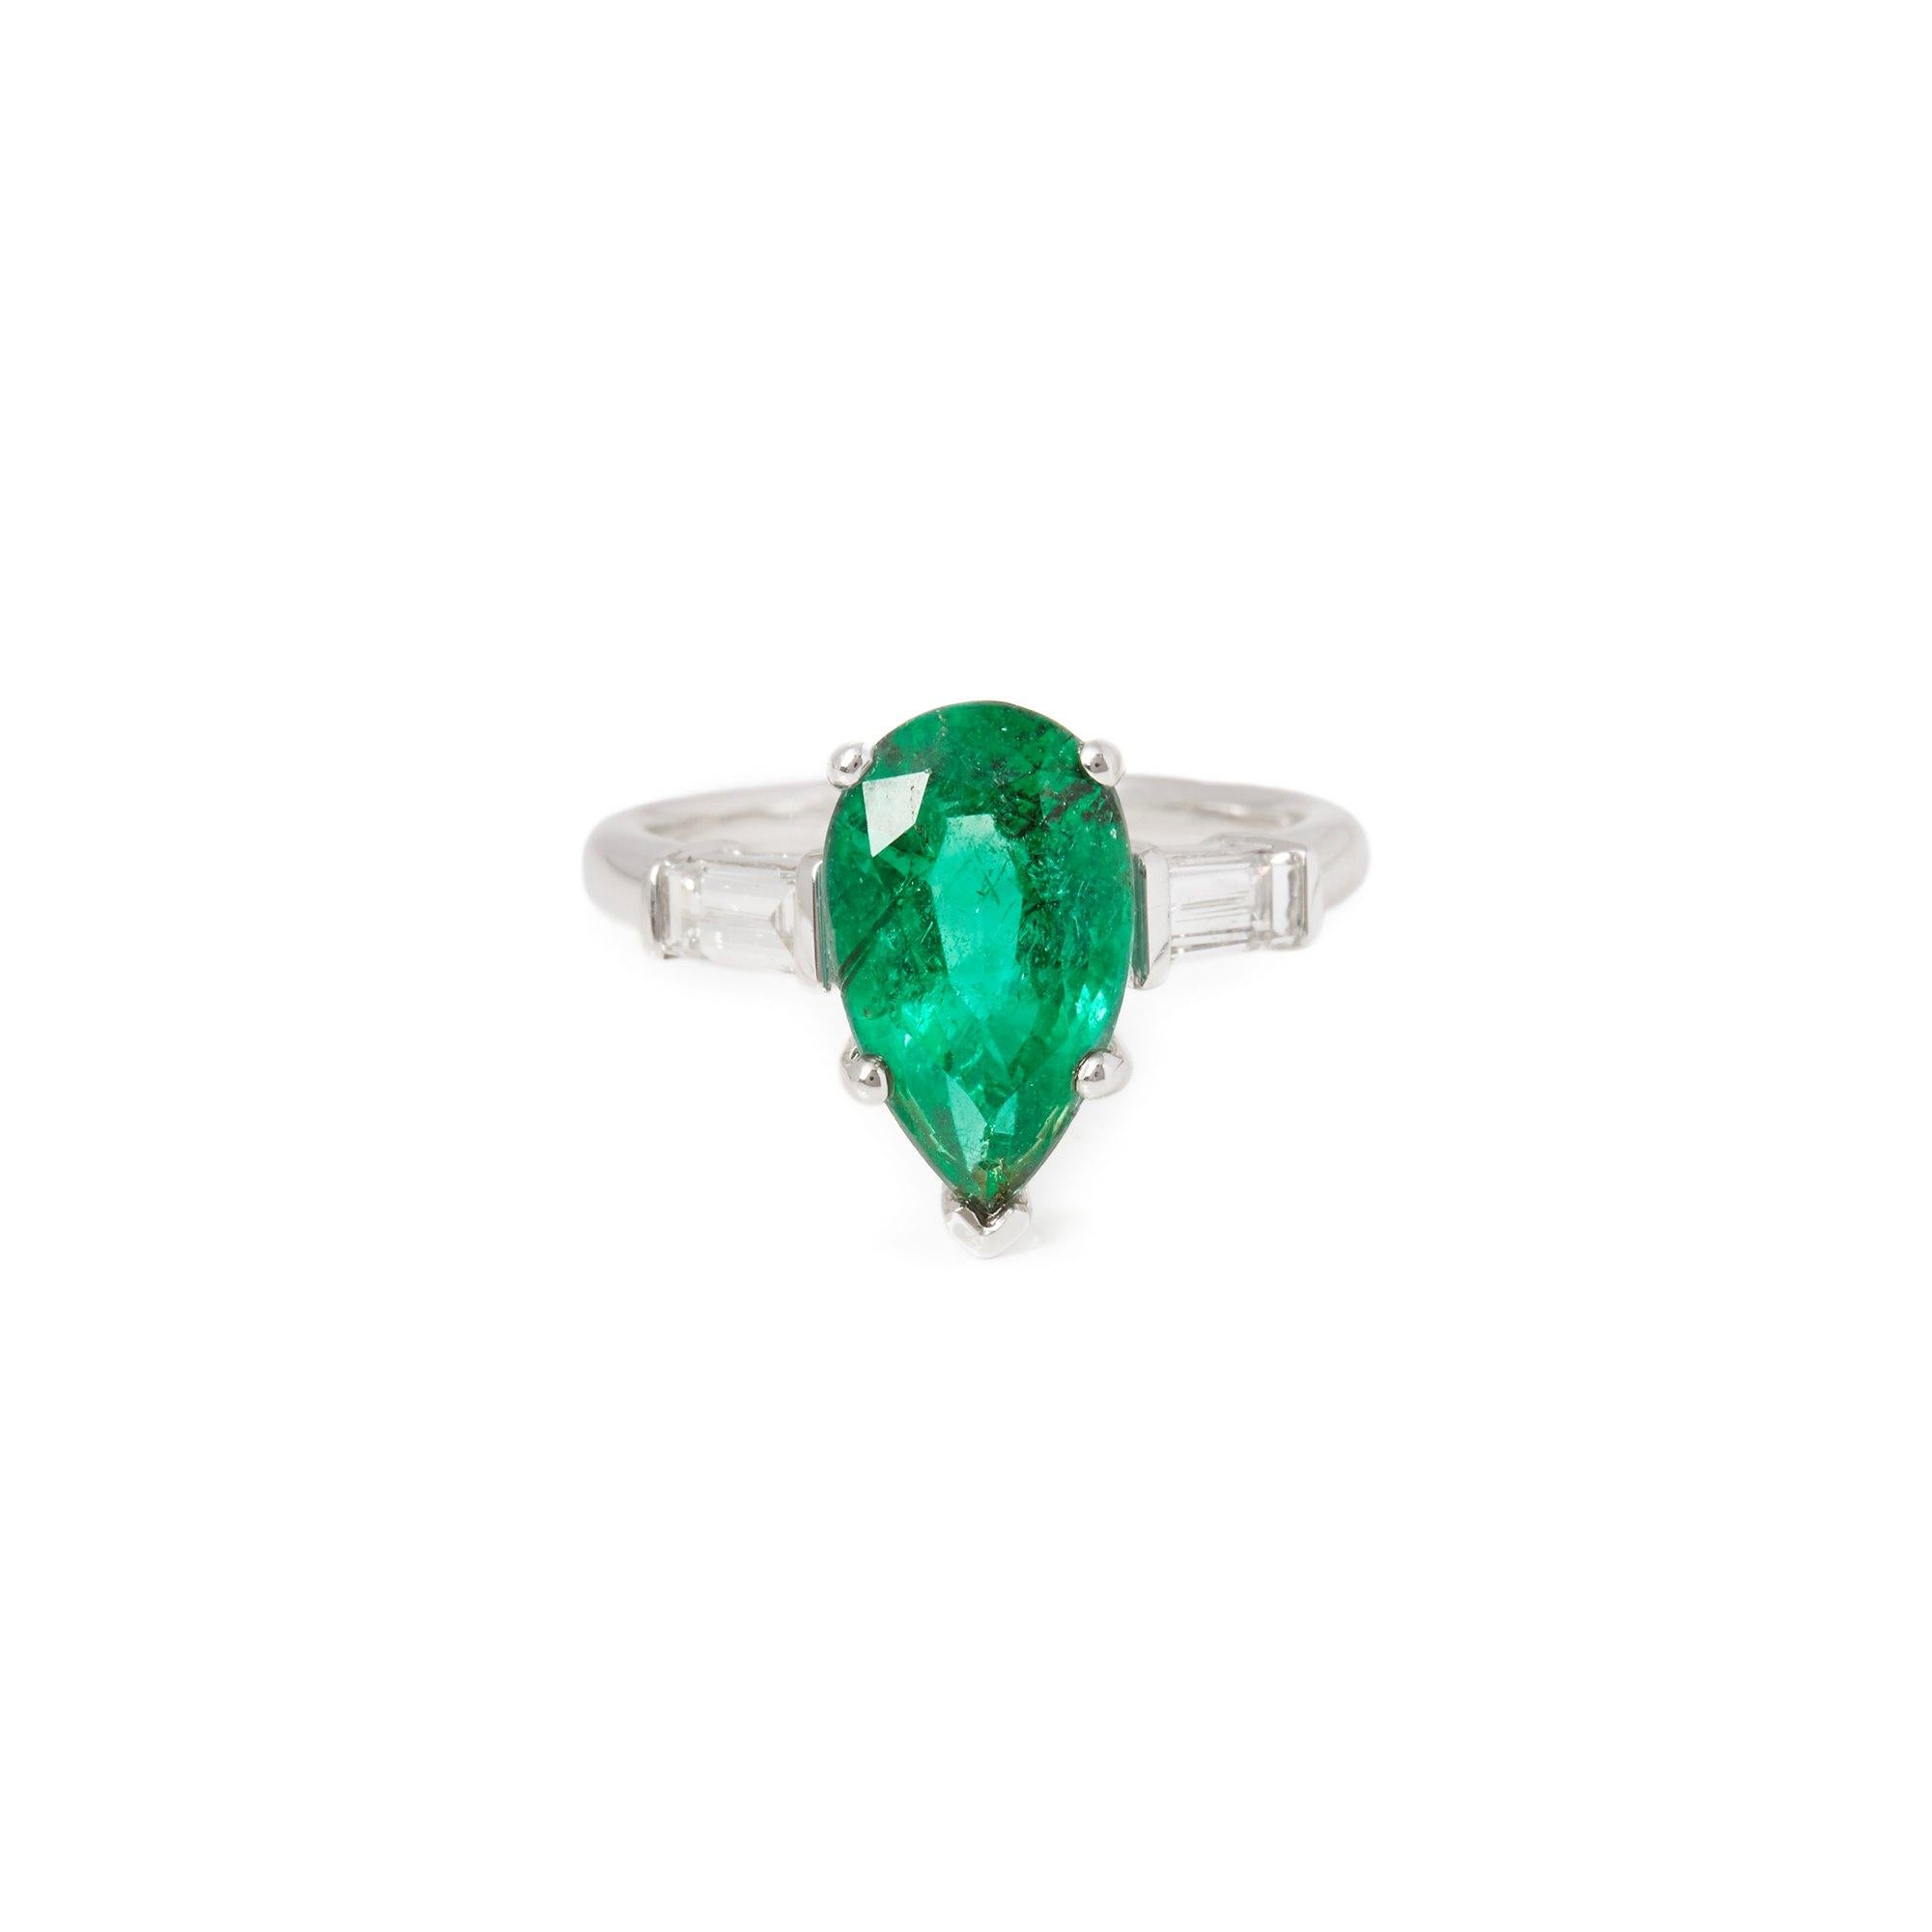 This ring designed by David Jerome is from his private collection and features one pear cut Emerald totalling 3.45cts sourced in Brazil. Set with two tapered baguette cut Diamonds totalling 0.45cts mounted in an 18k white gold setting. UK finger